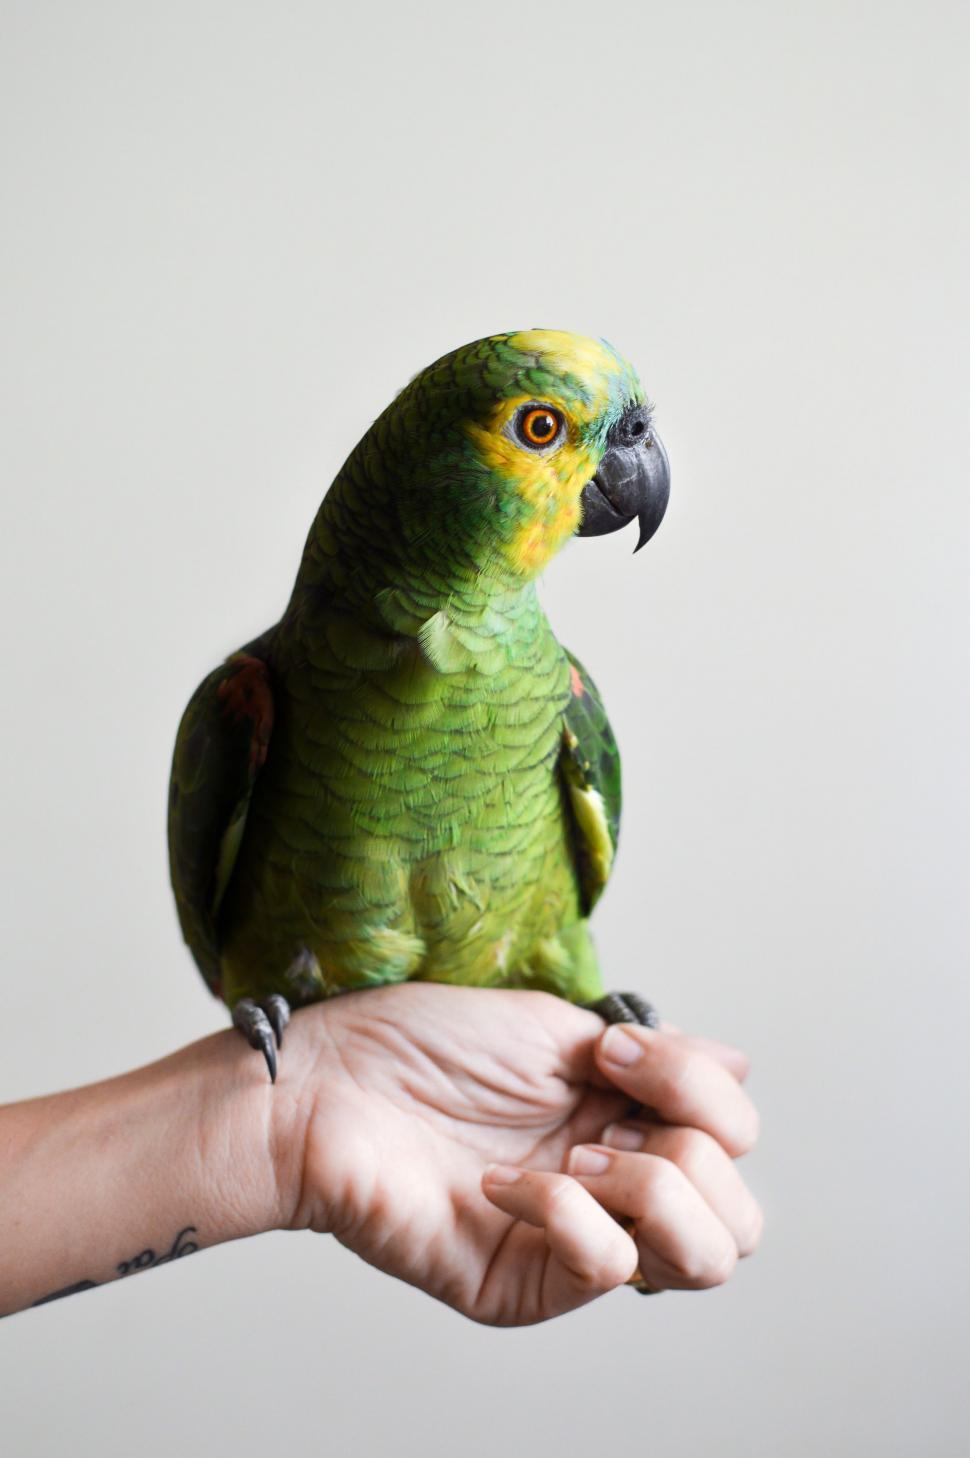 Free Image of Parrot on hand  